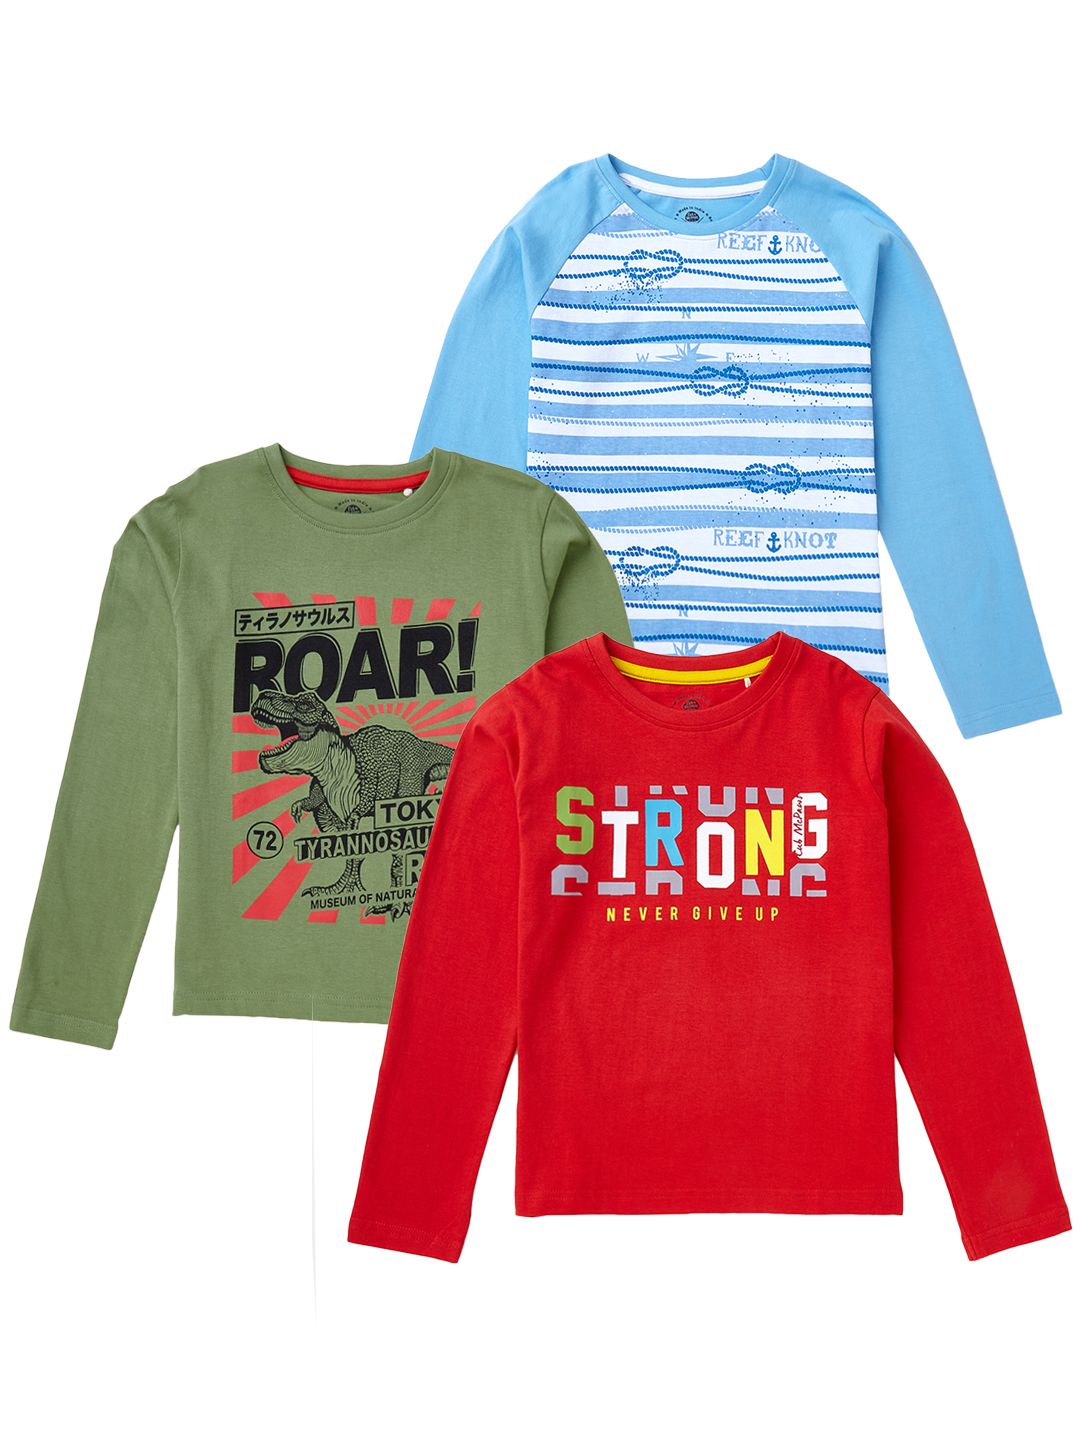 Boys Pack of 3 T-Shirts Full Sleeves,Multicolor